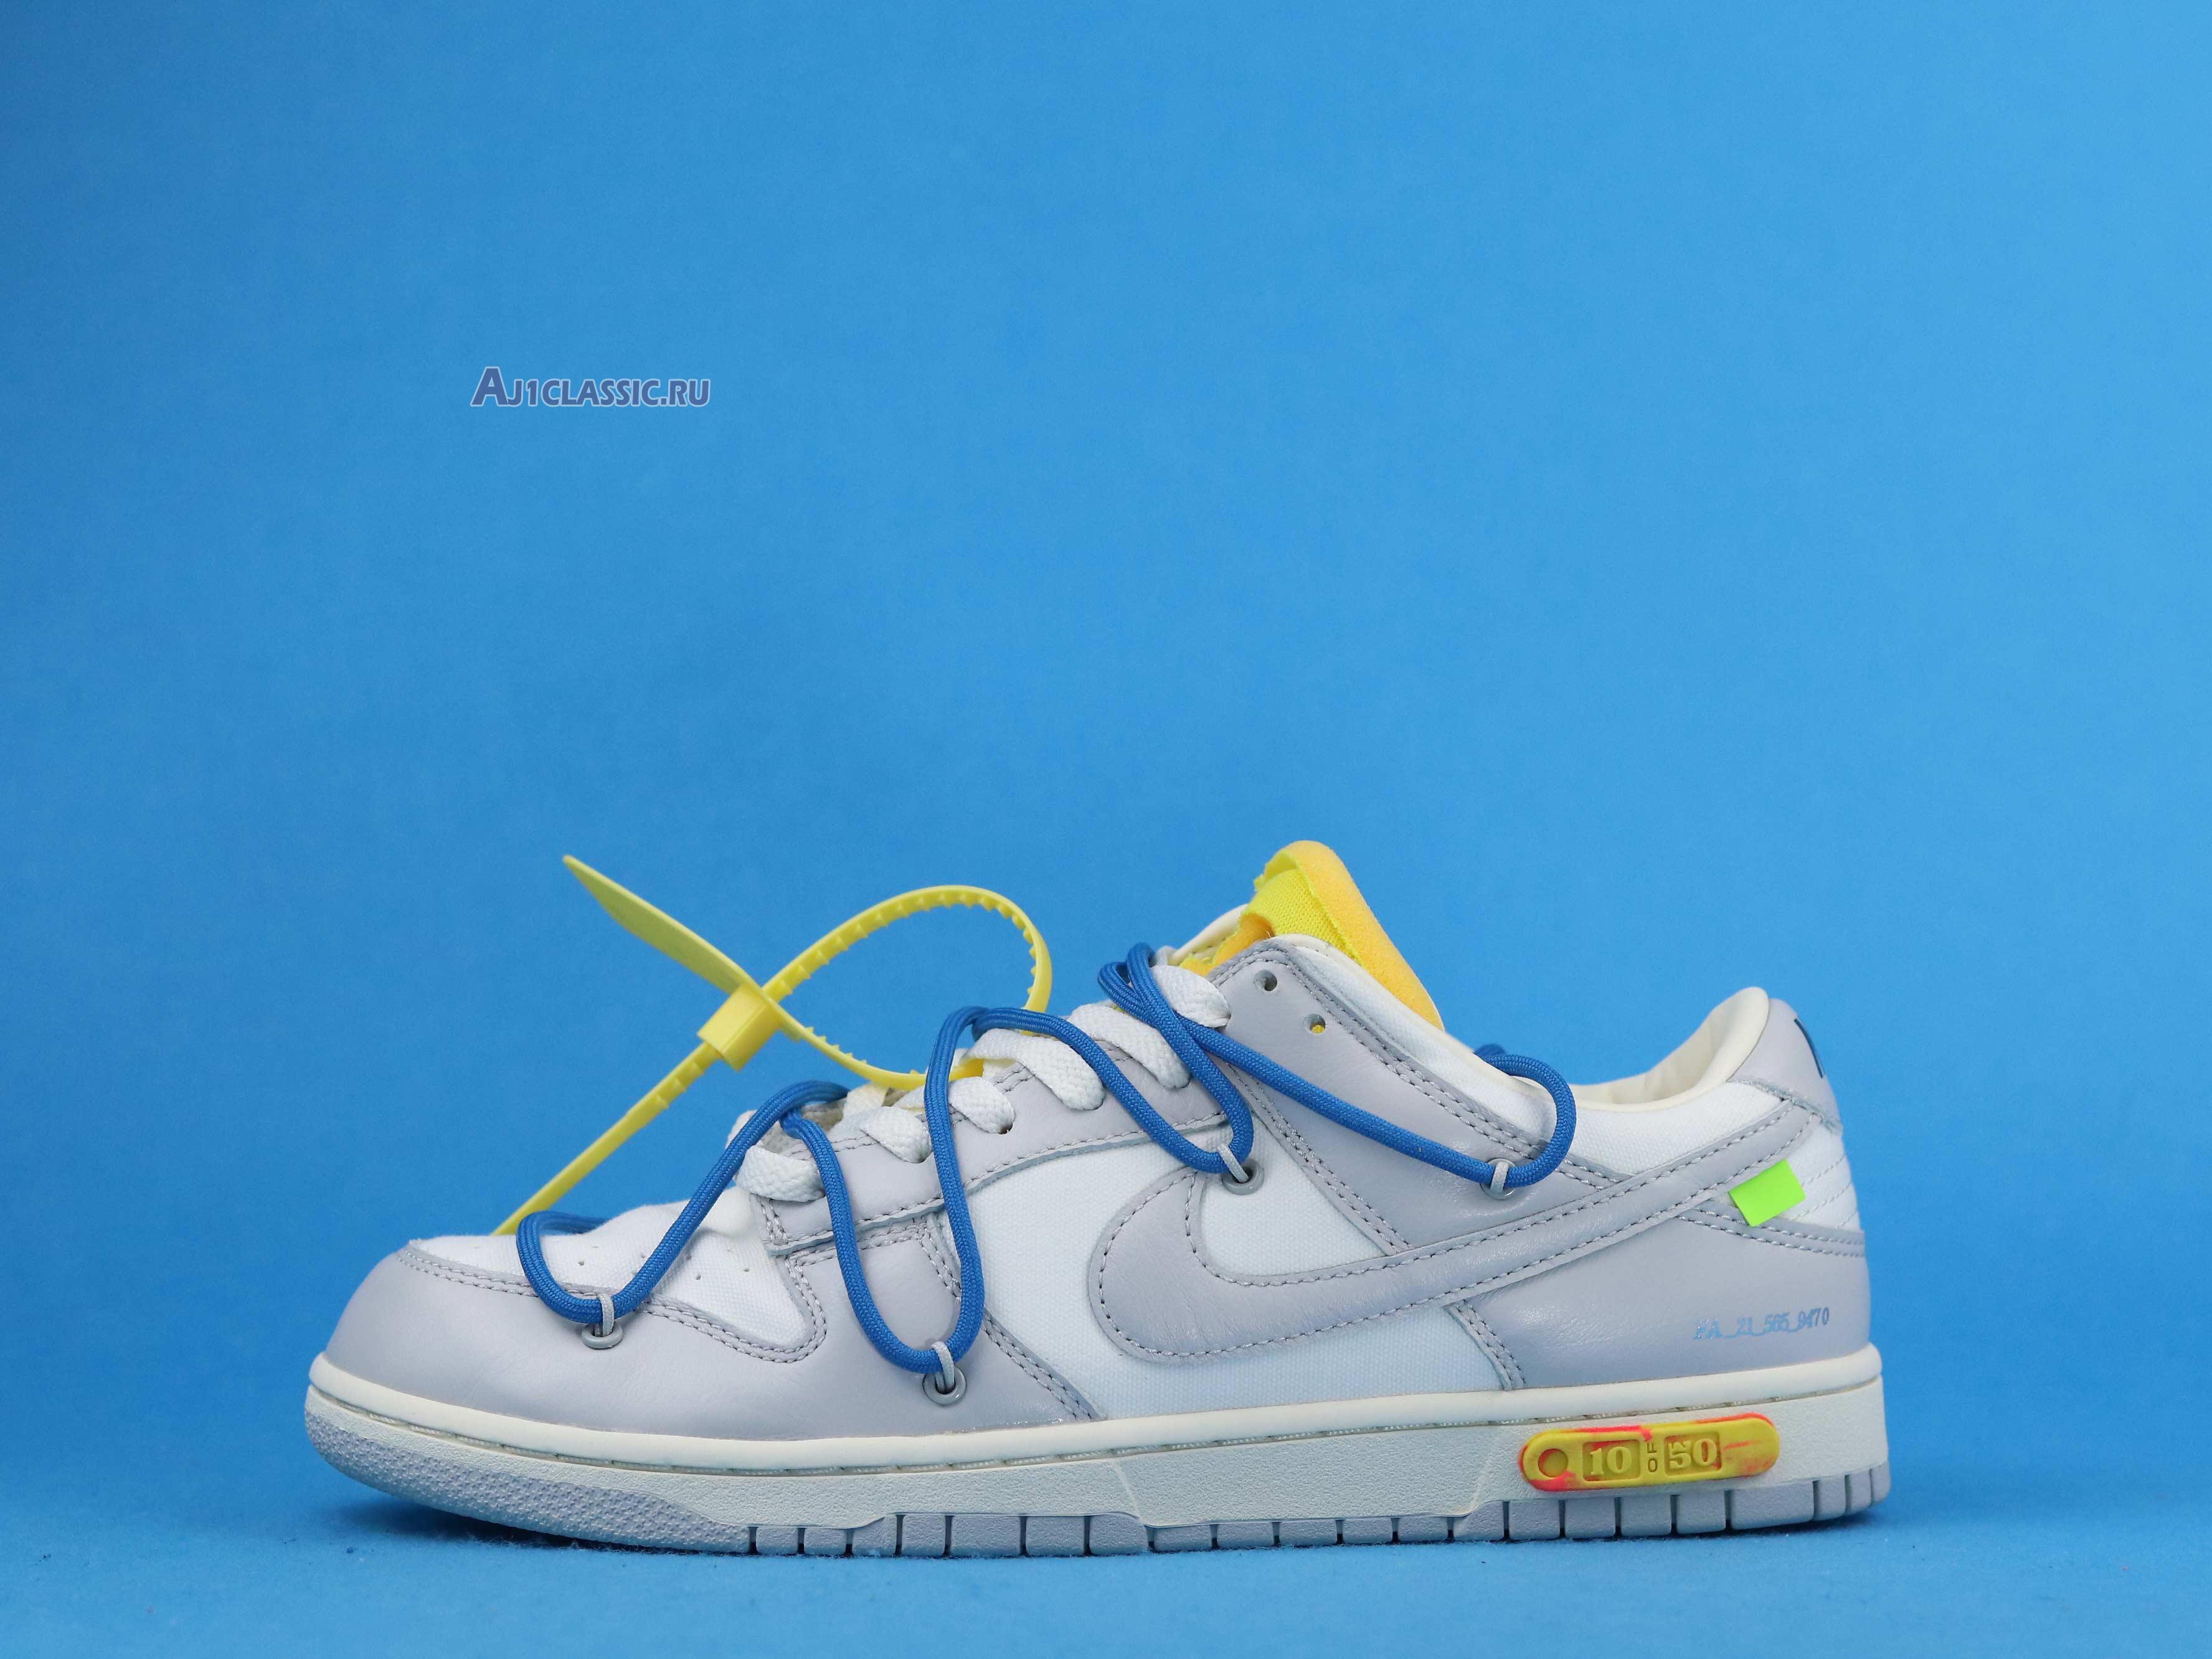 Off-White x Nike Dunk Low "Lot 10 of 50" DM1602-112